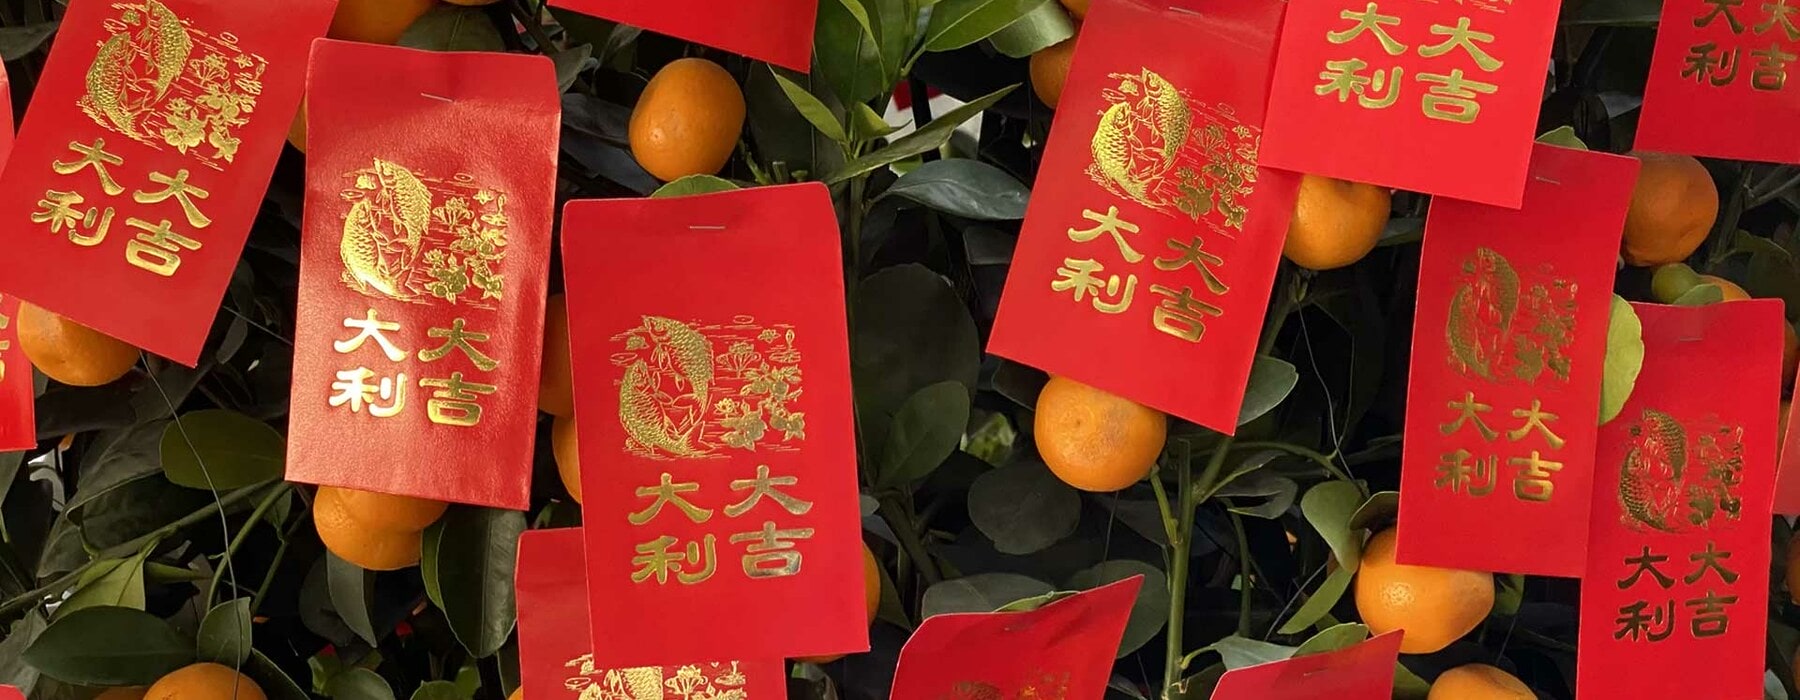 Ang Pao A Red Envelope With Good Words And Lucky Sign Contains